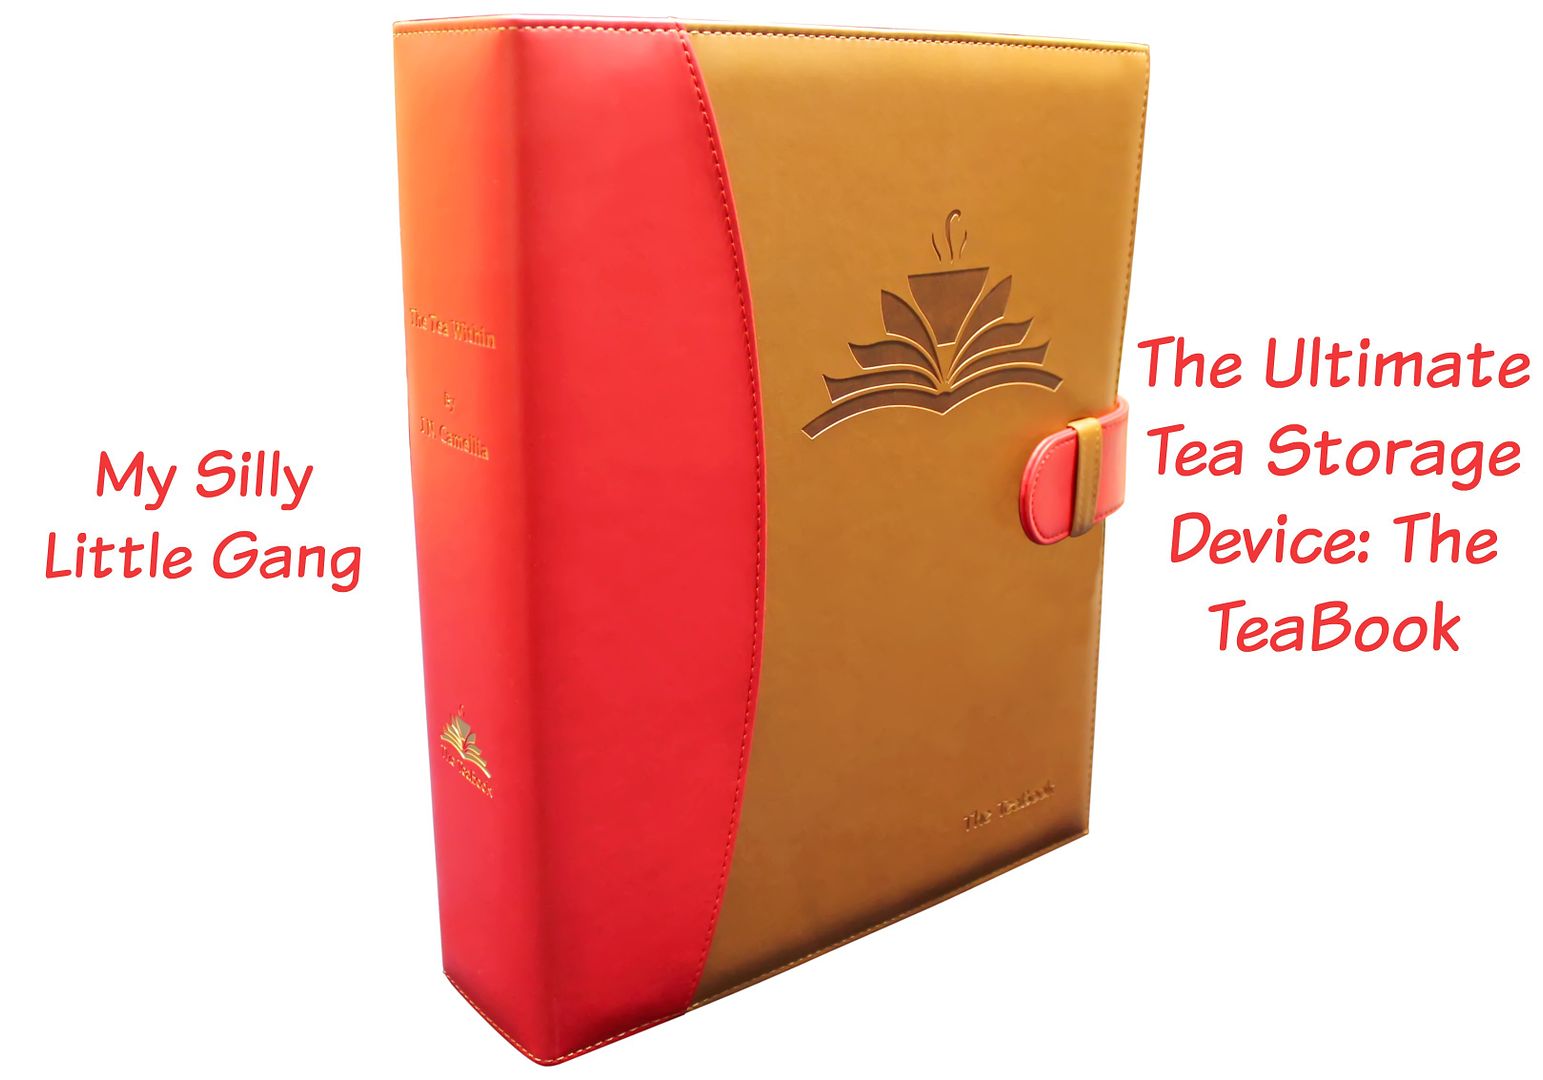 The Ultimate Tea Storage Device The TeaBook